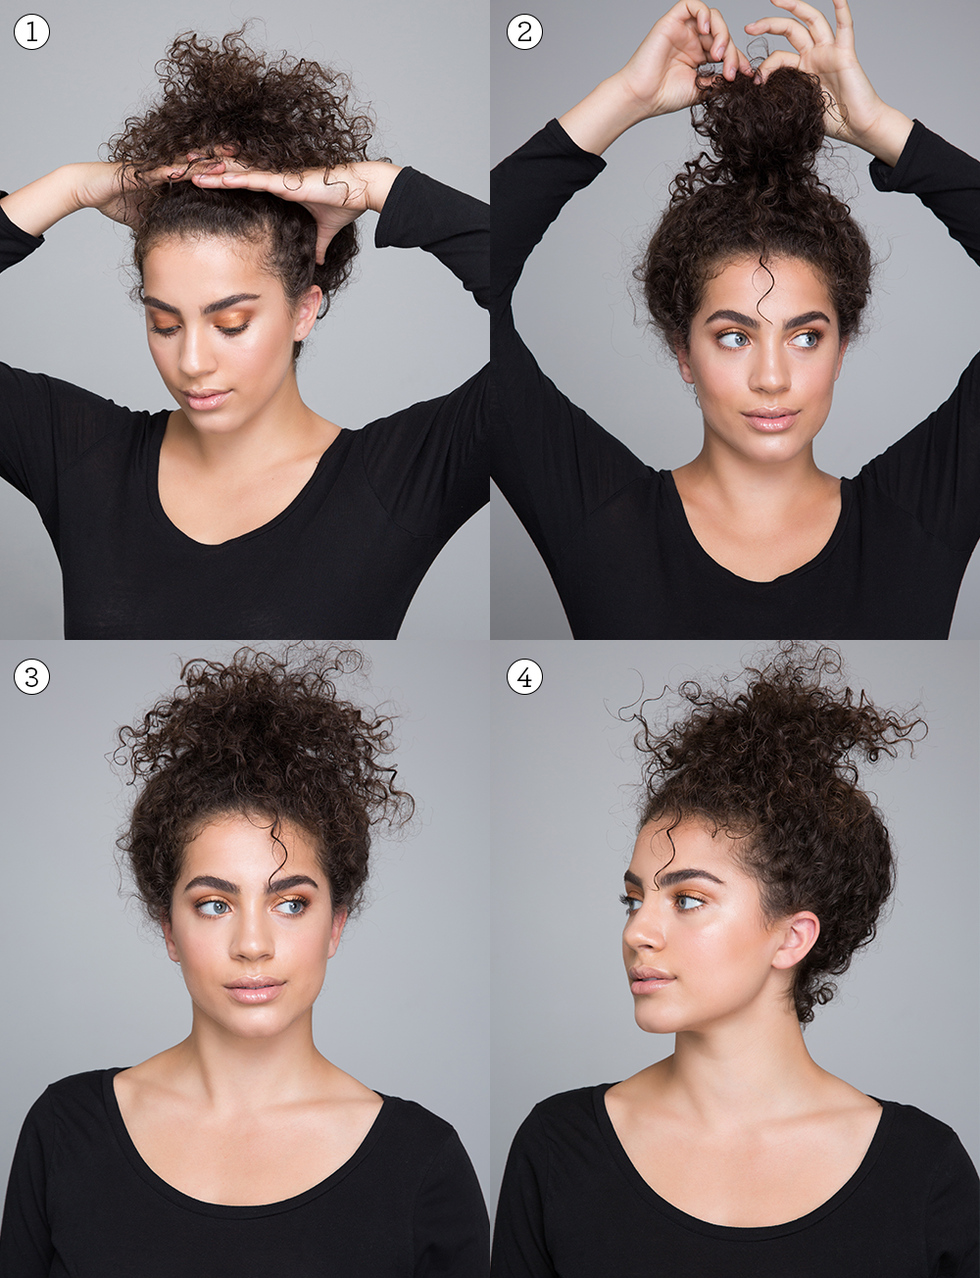 16 Best Curly Hair Tips